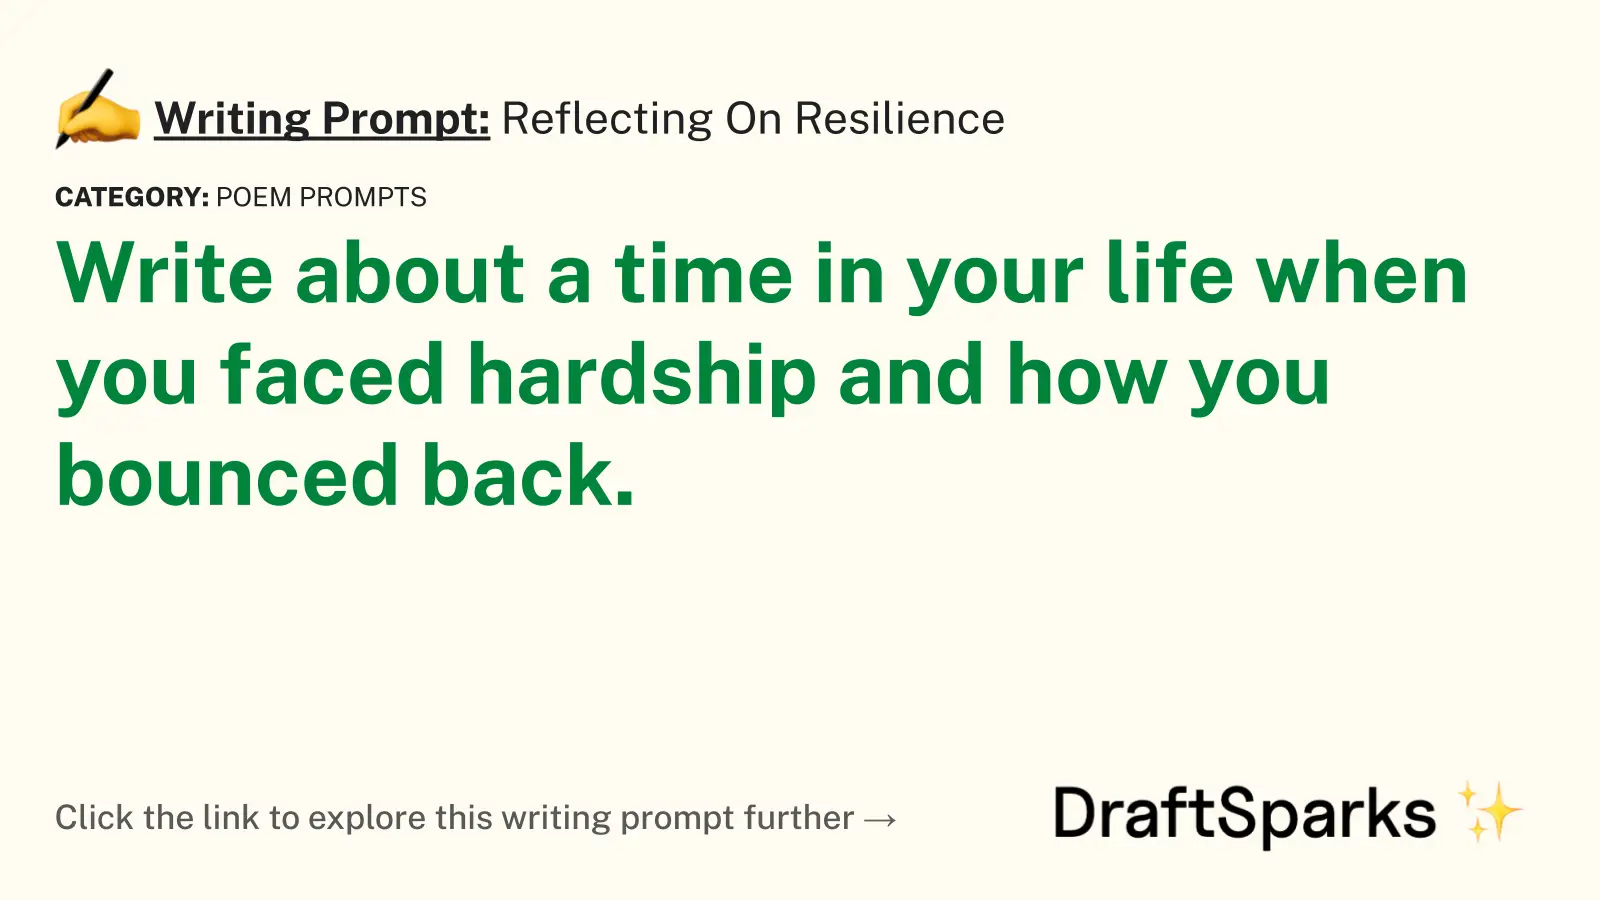 Reflecting On Resilience